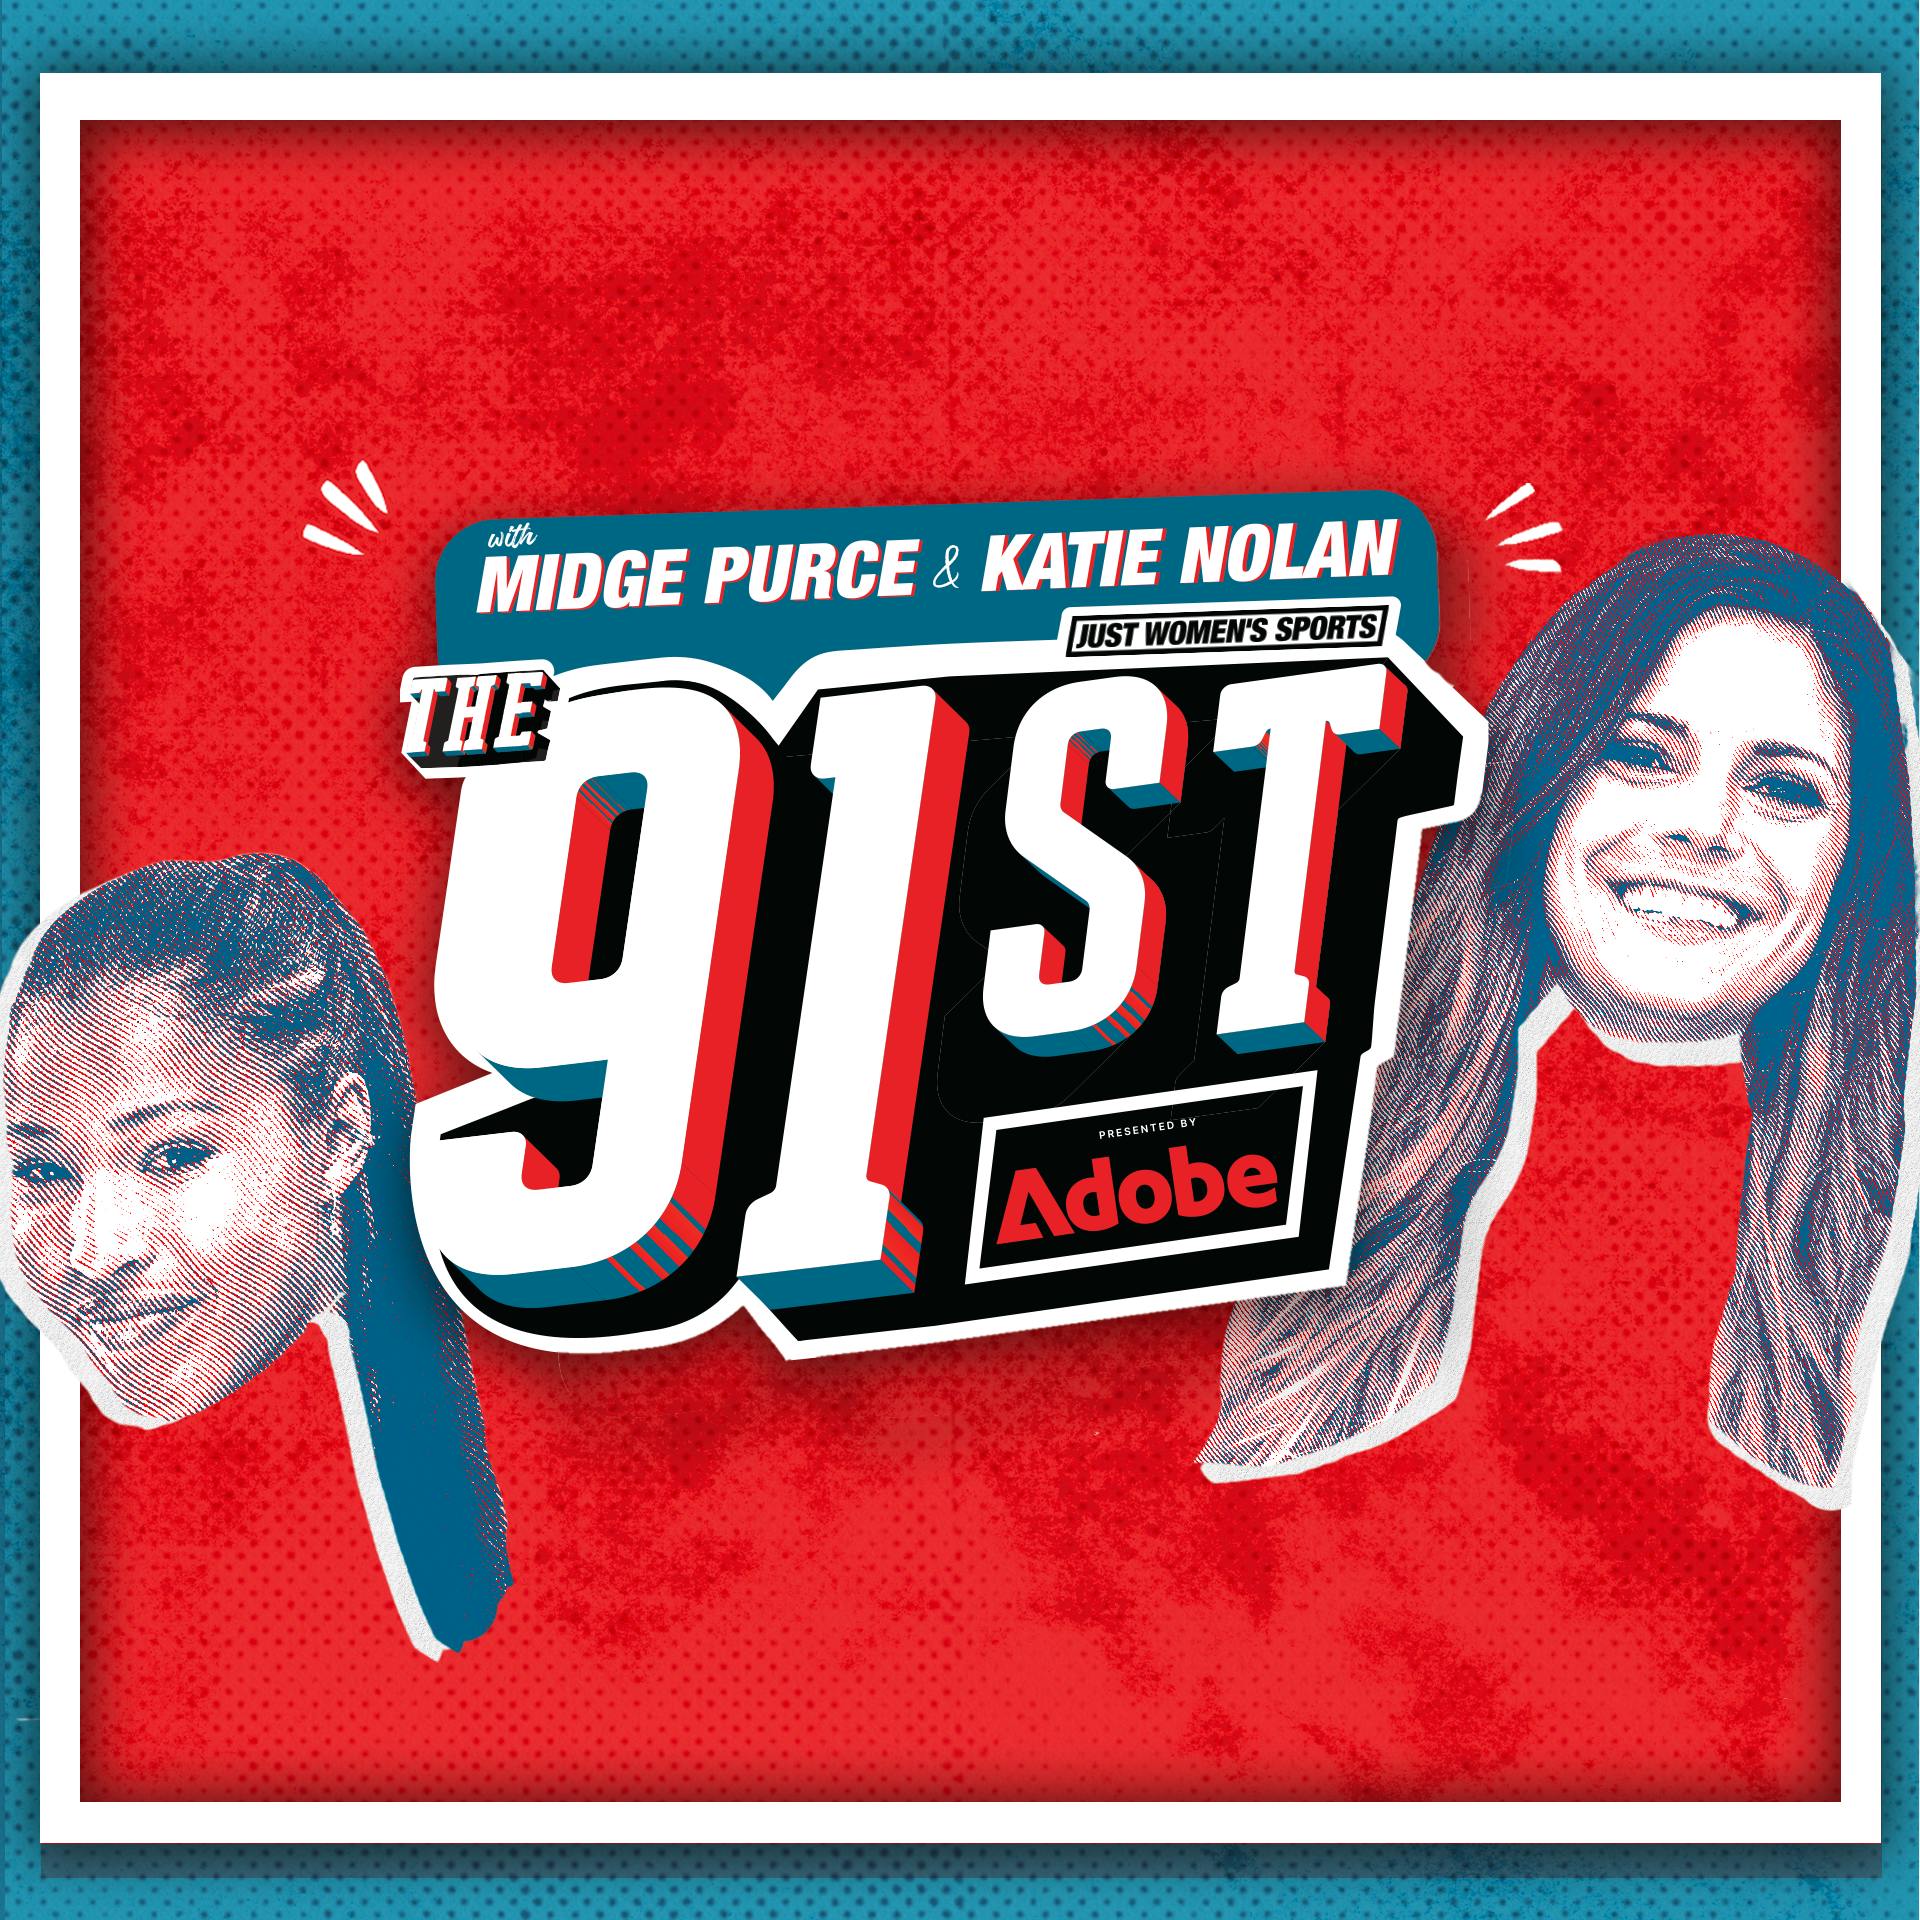 Every New Beginning Comes from Some Other Beginning’s End | The 91st with Midge Purce and Katie Nolan presented by Adobe